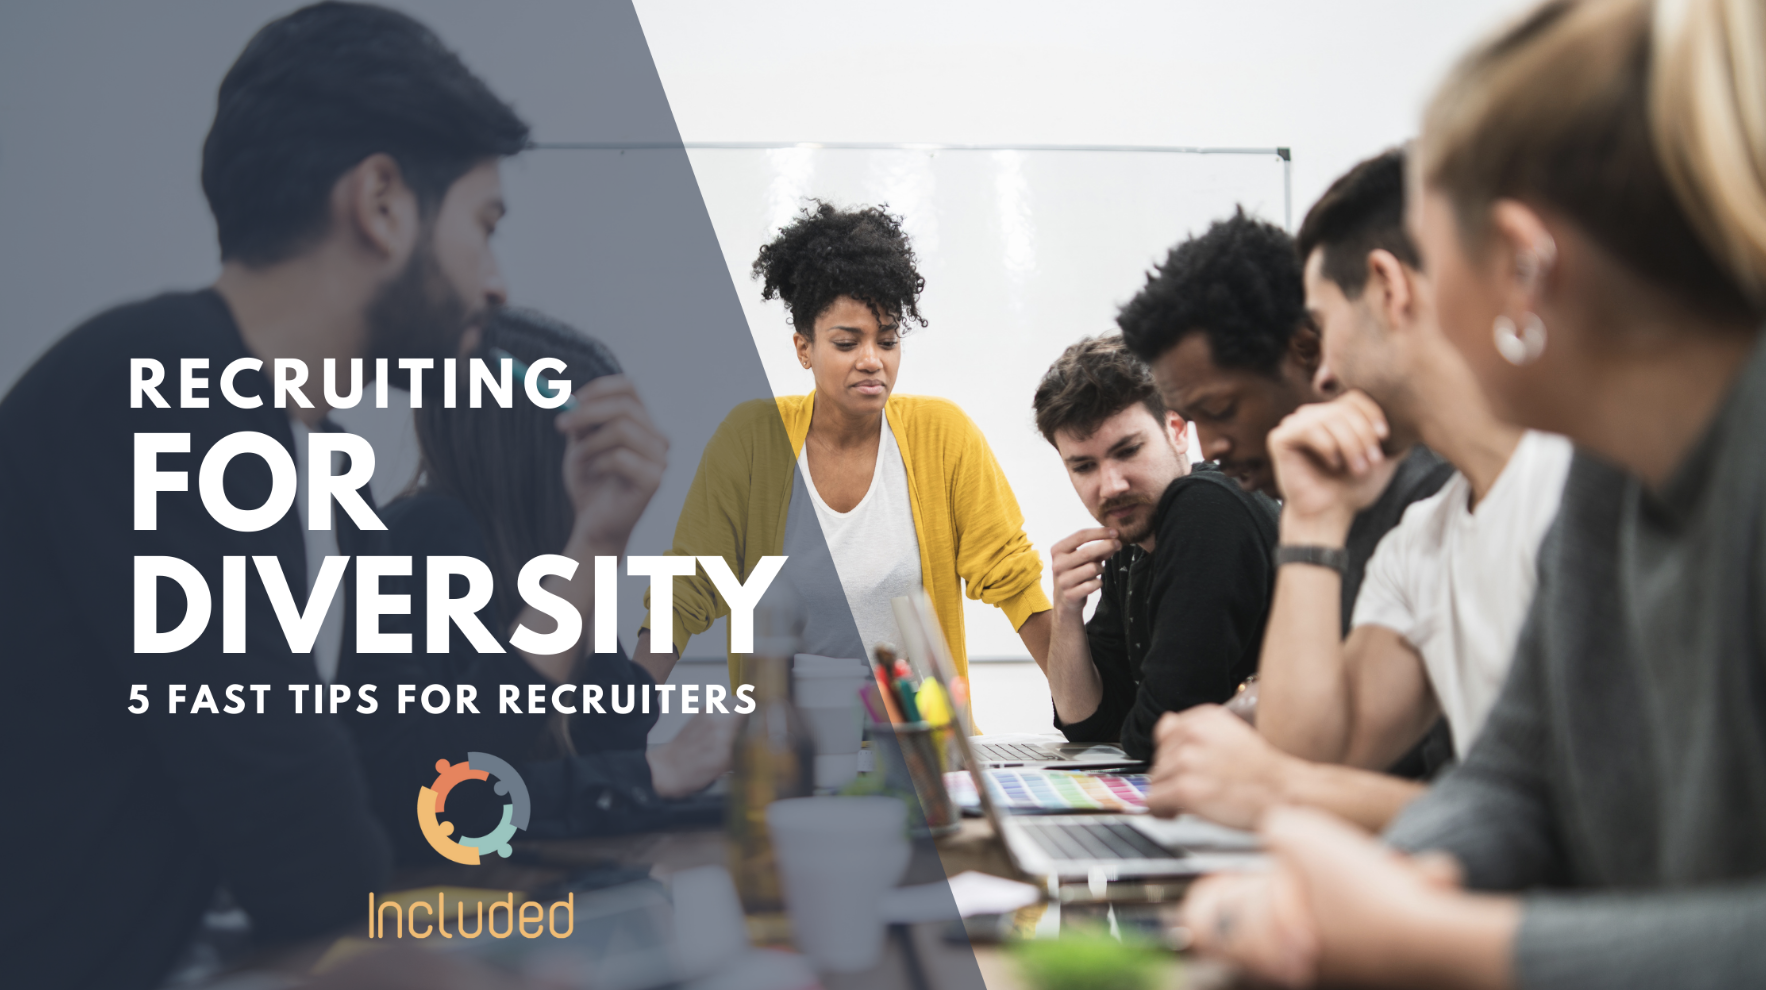 Recruiting for Diversity: 5 Fast Tips for Recruiters